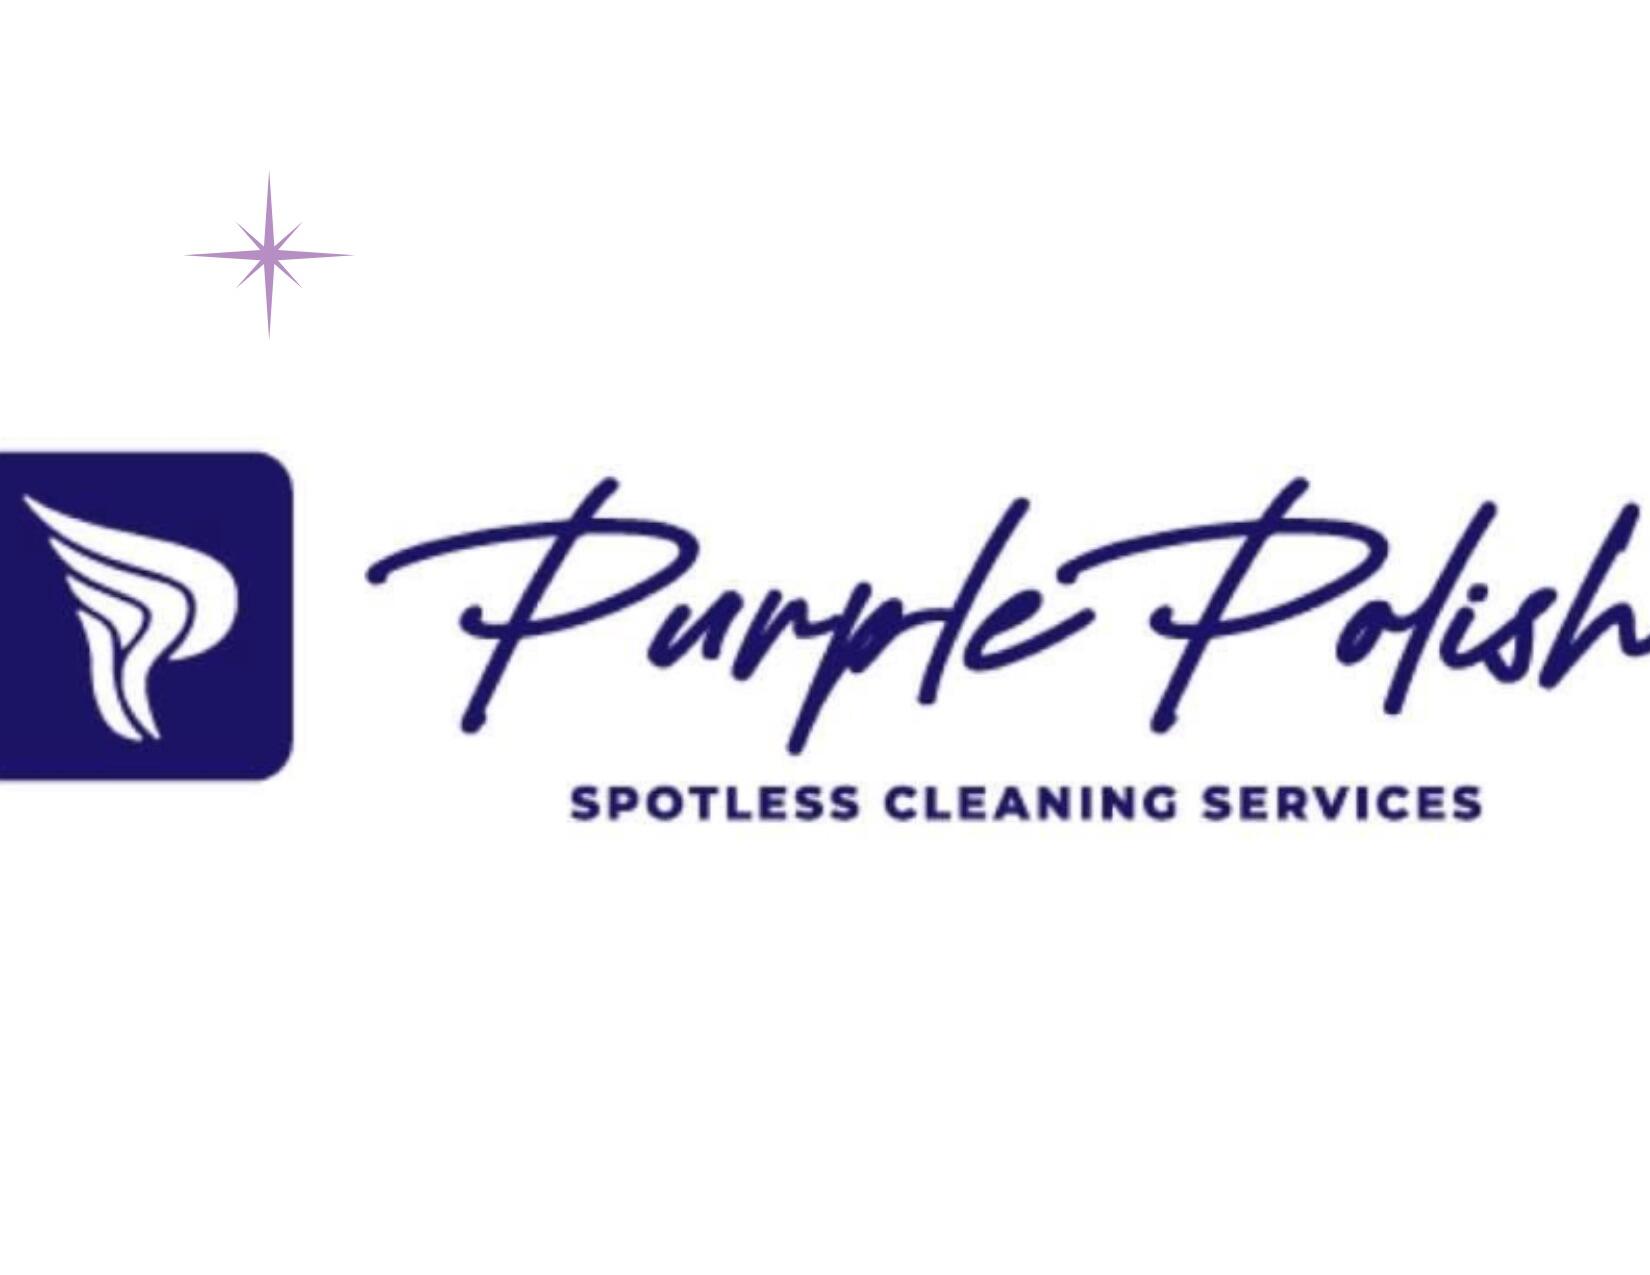 Spotless Cleaning Services